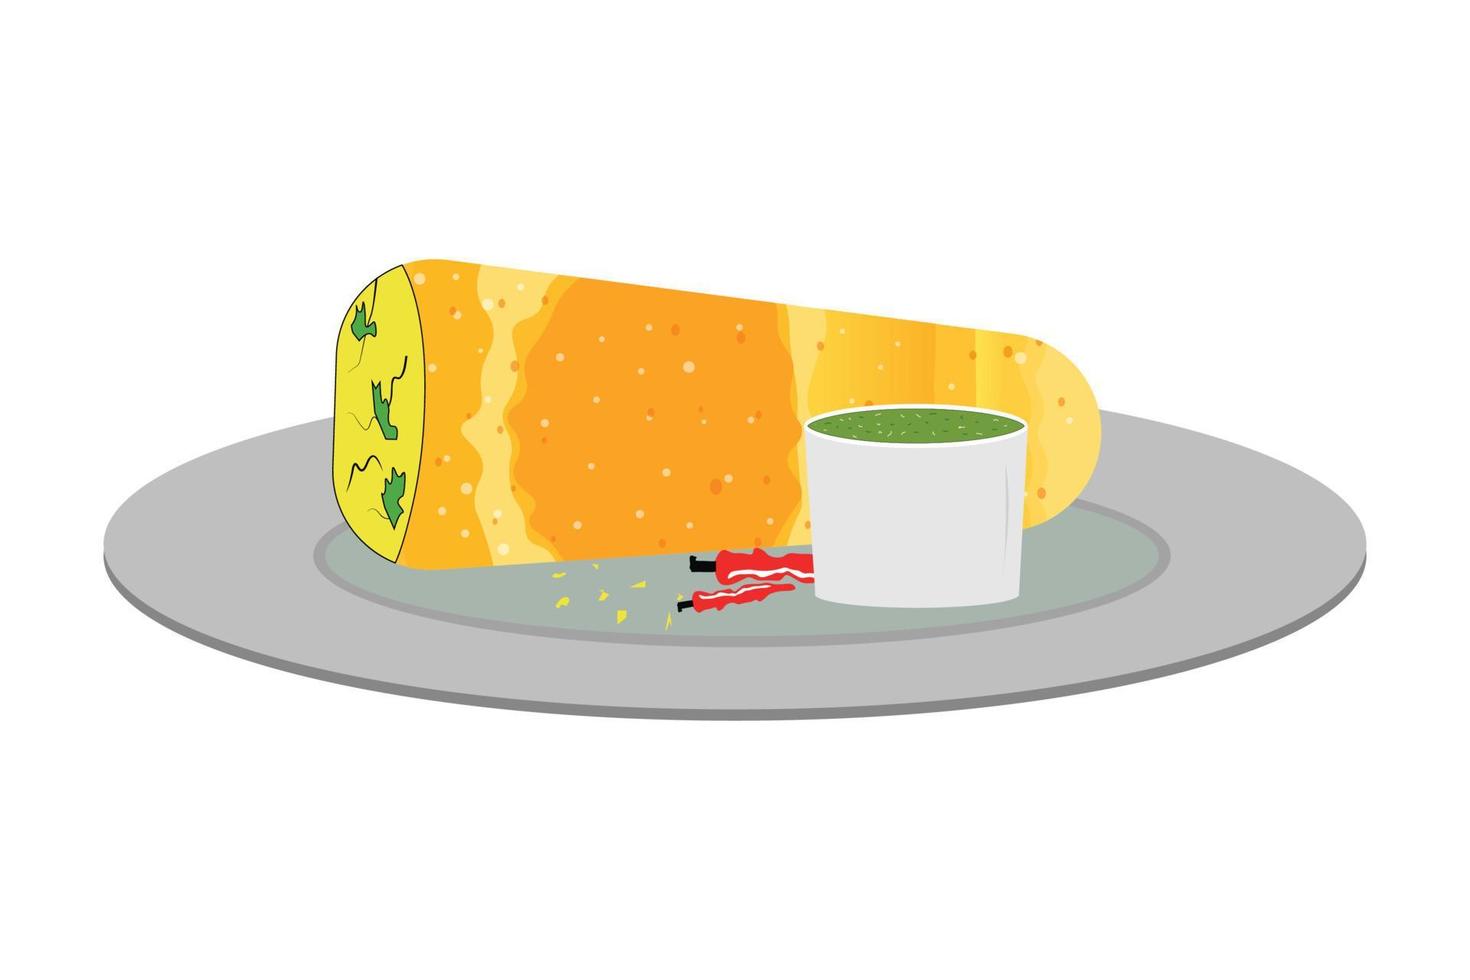 Indian Traditional Masala Dosa with chily vector design.